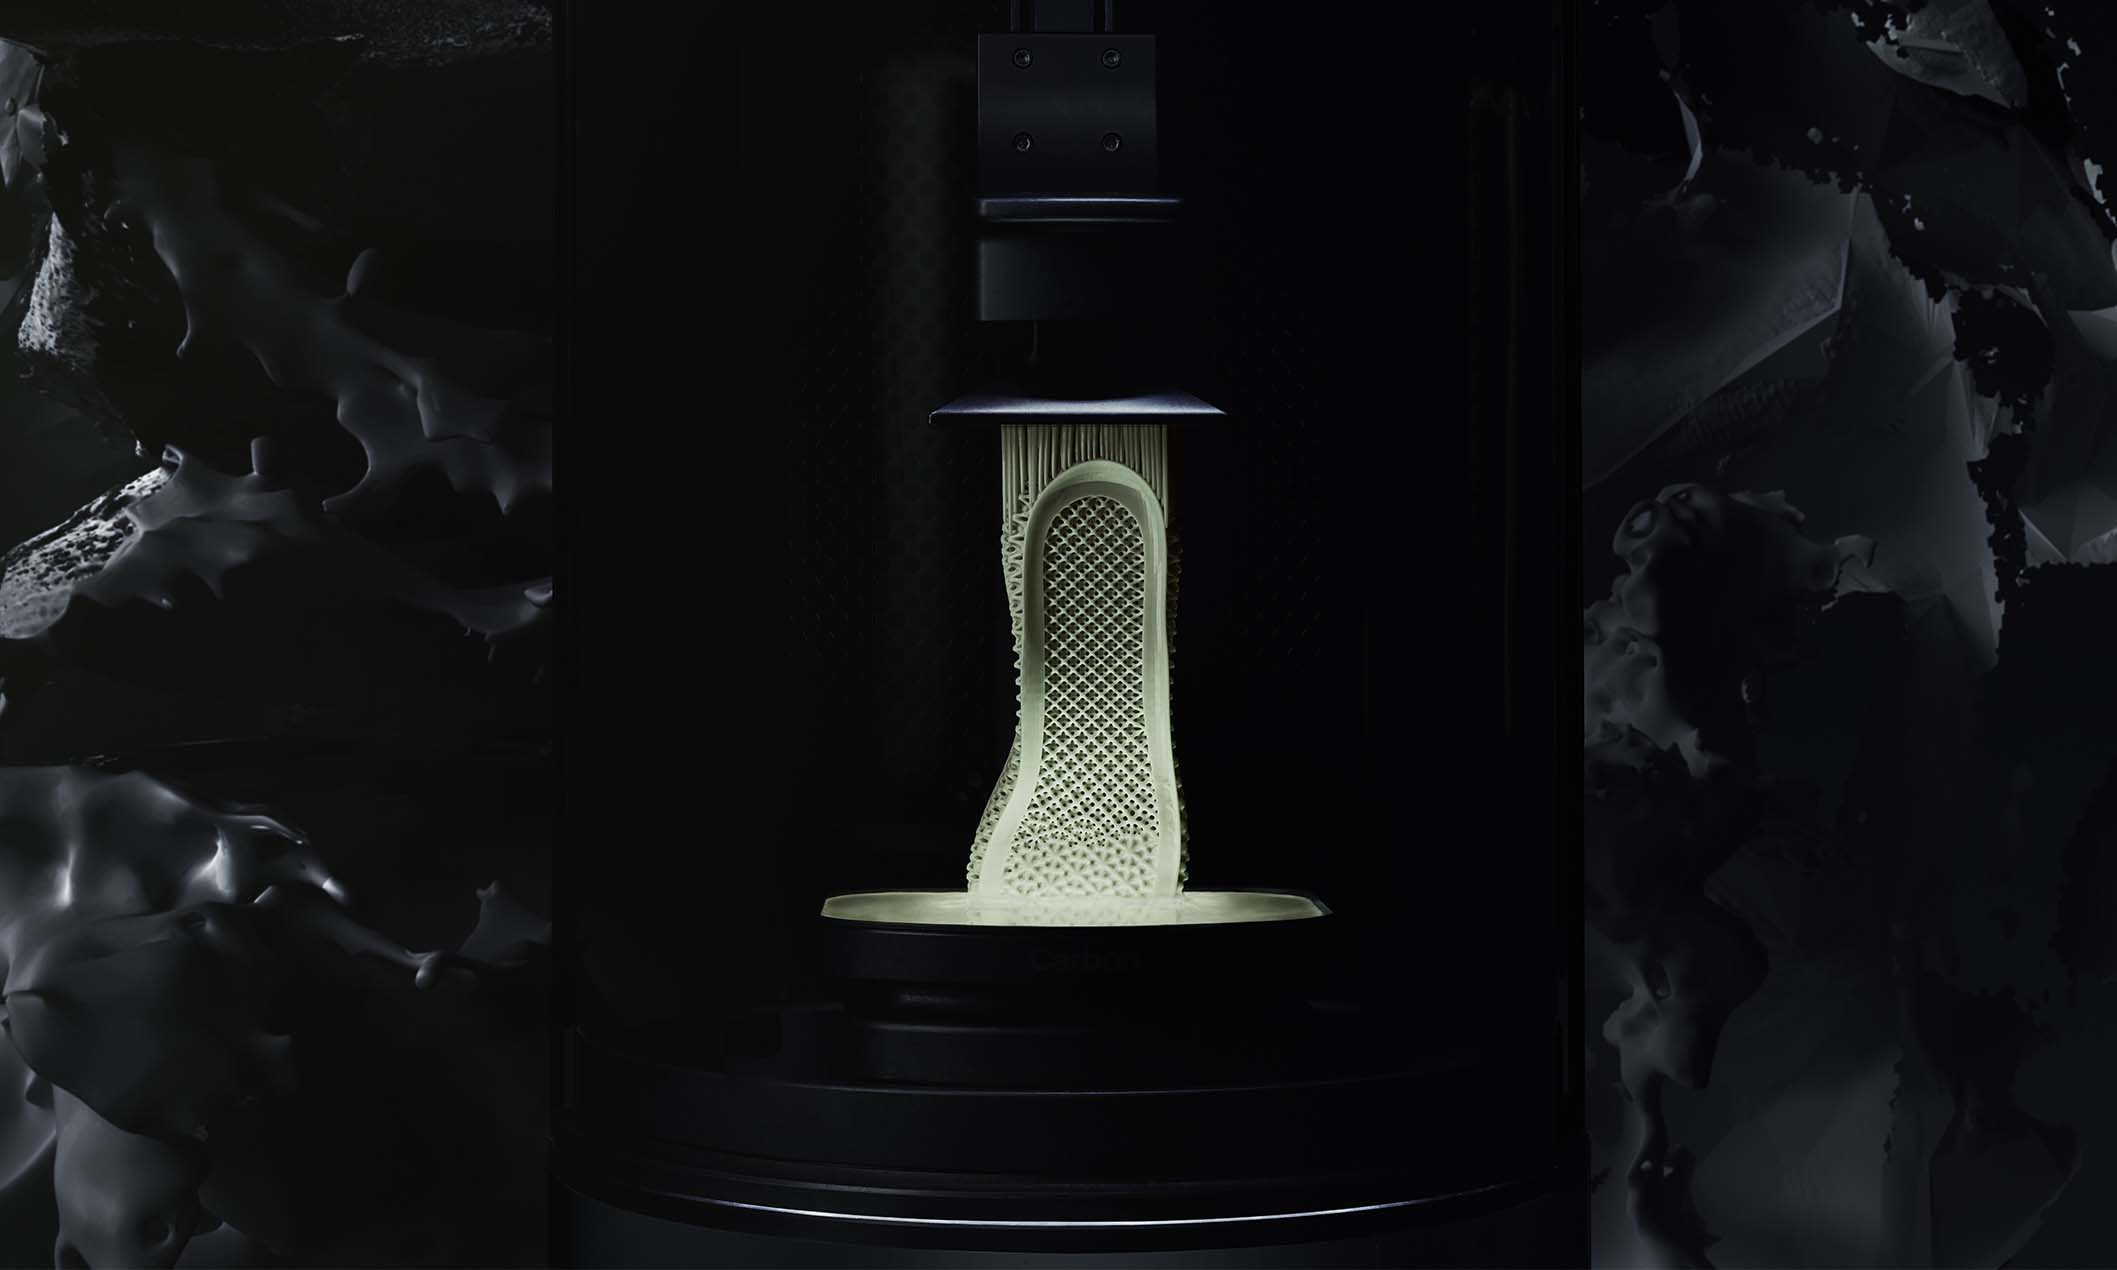 Carbon & adidas: Mass-Production with 3D Printing